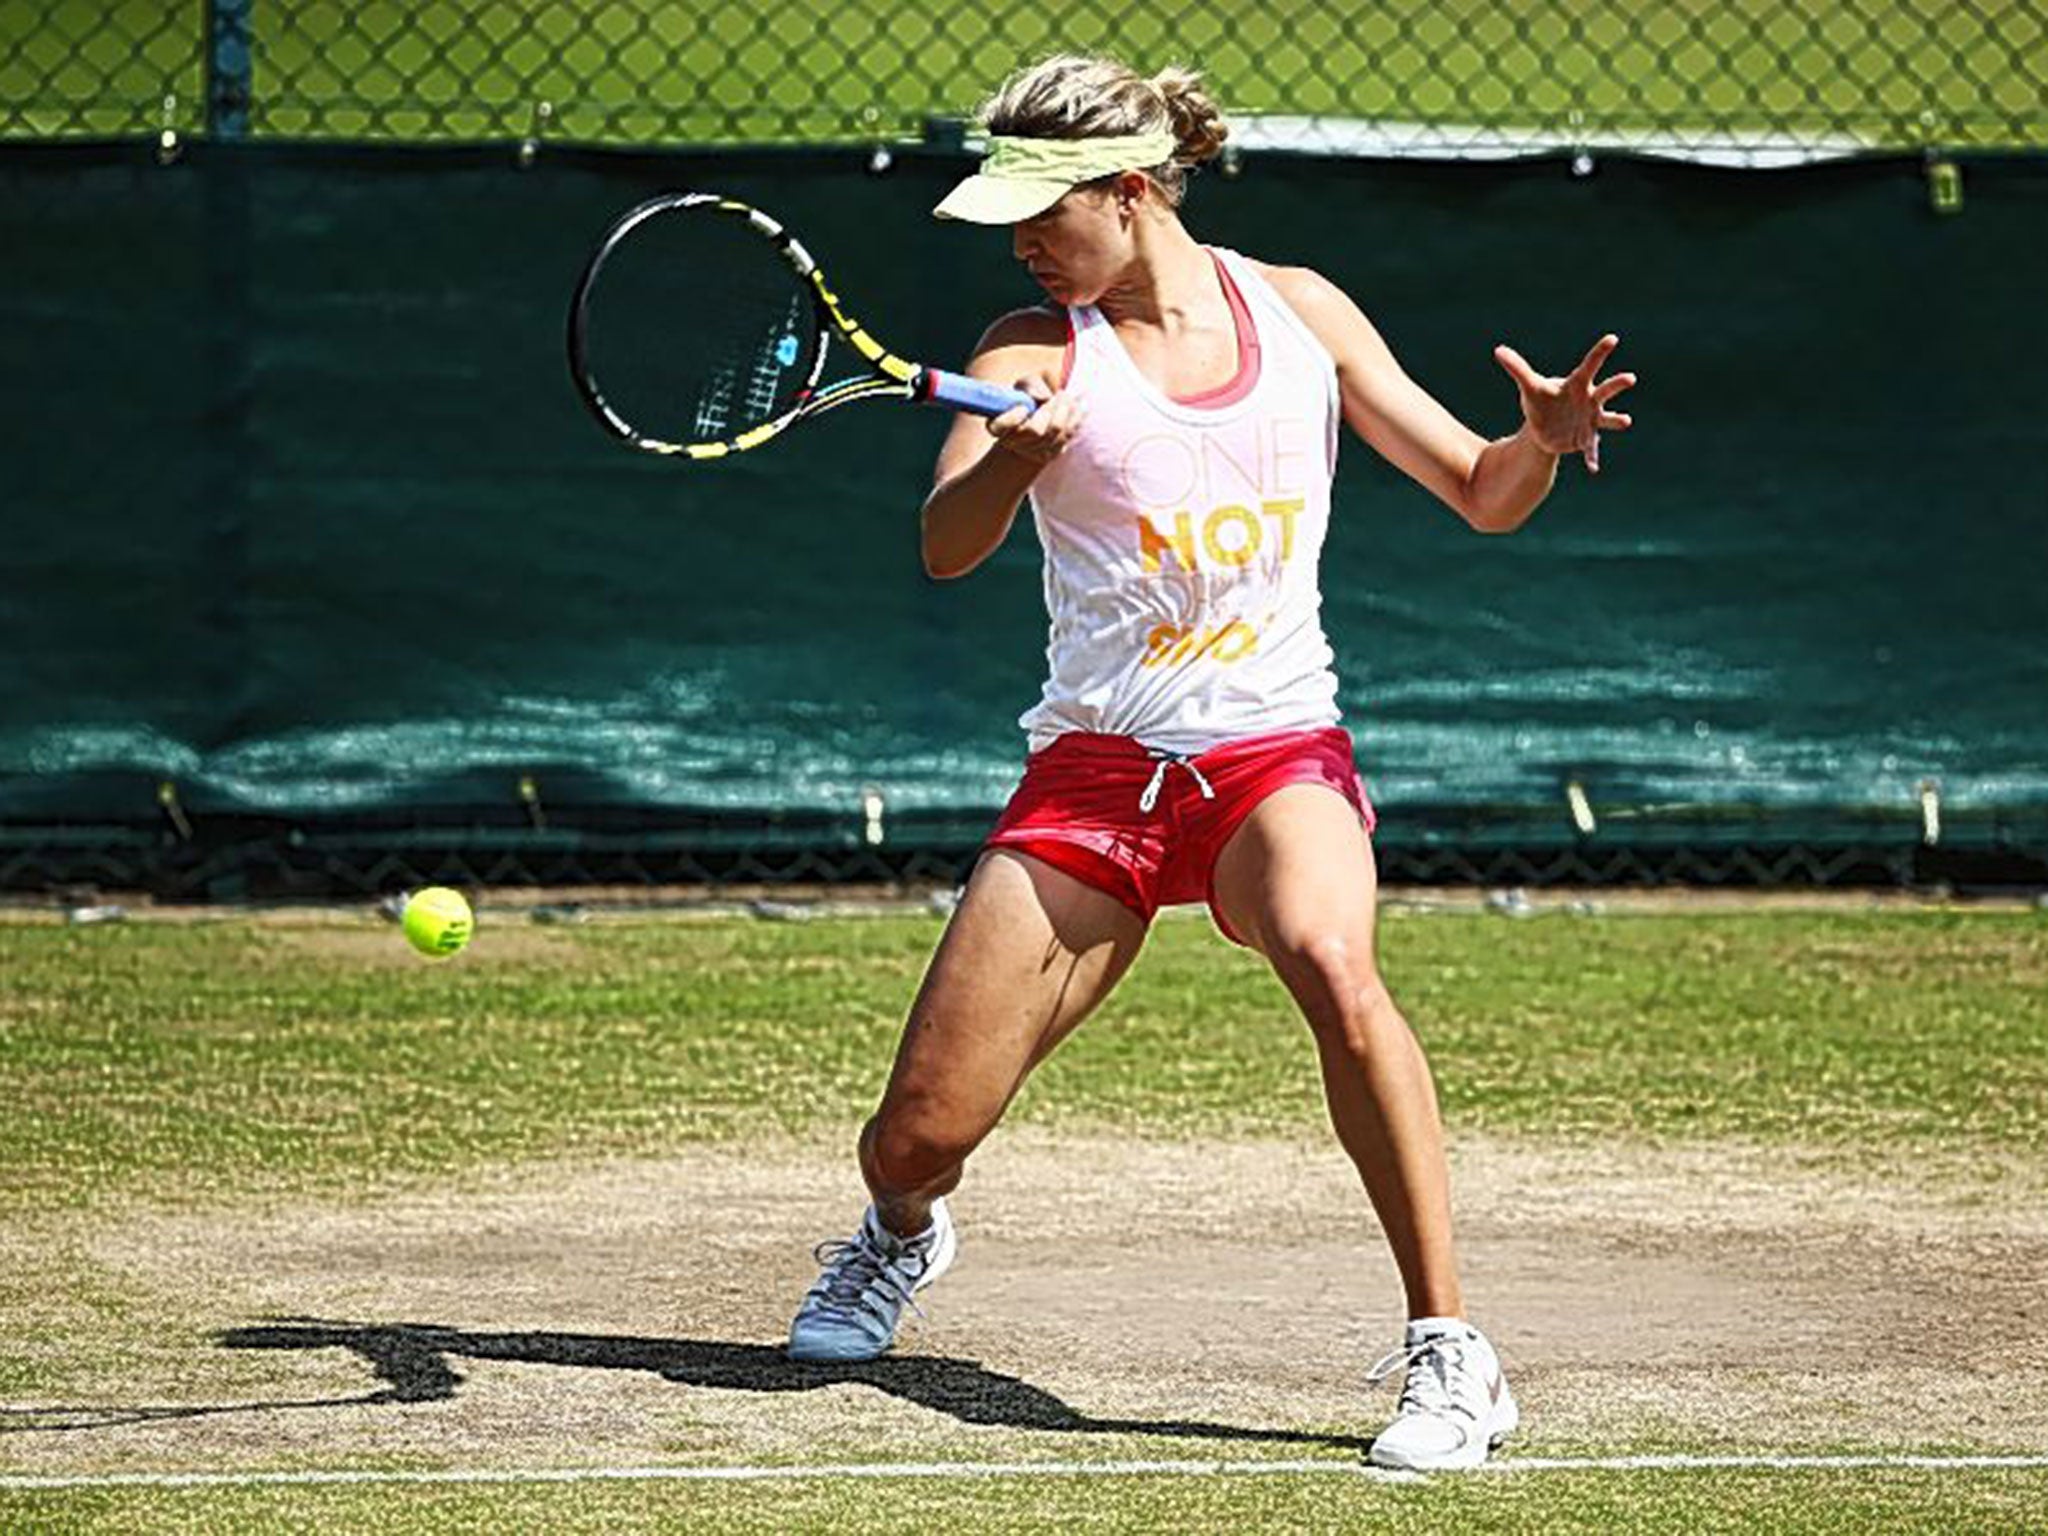 Canada’s Eugenie Bouchard at a practice session for the final yesterday